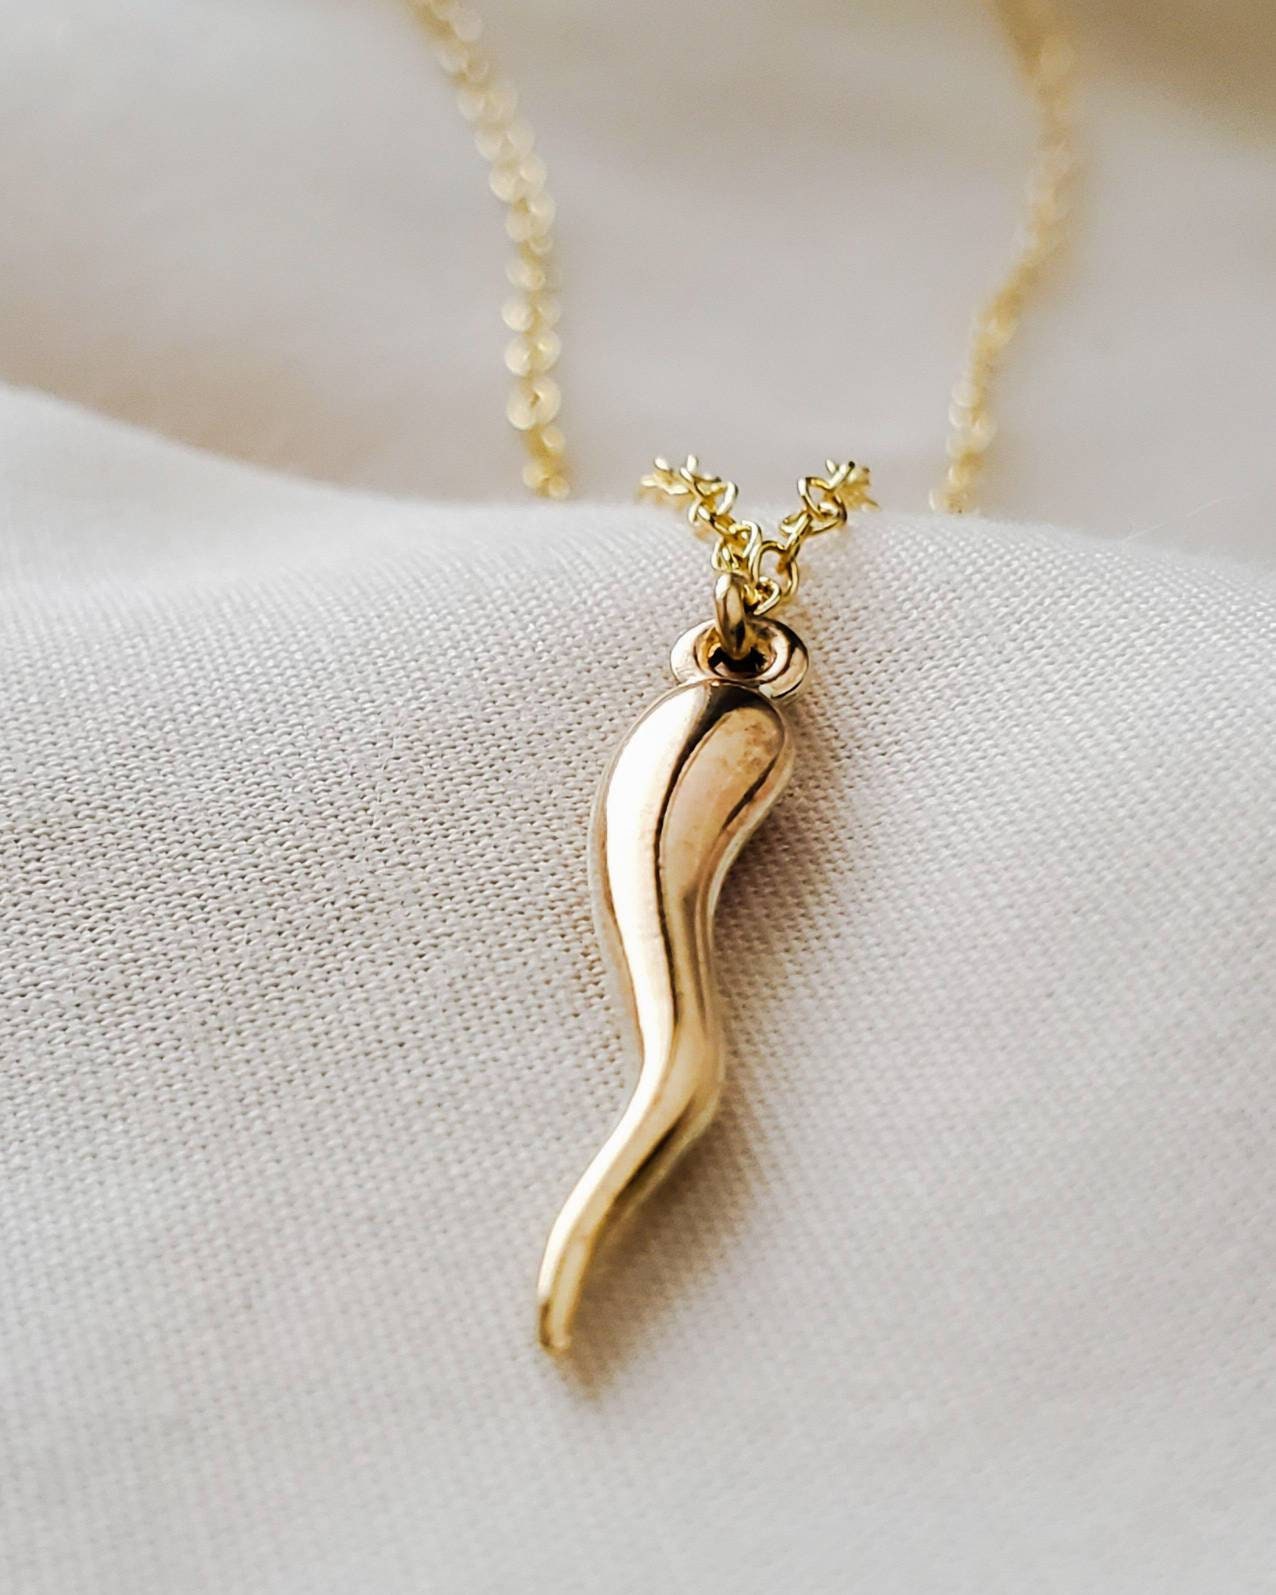 Italian Horn Pendant + Bead Chain Necklace // 18k Gold Plated Stainless  Steel - Blackjack Jewelry - Touch of Modern